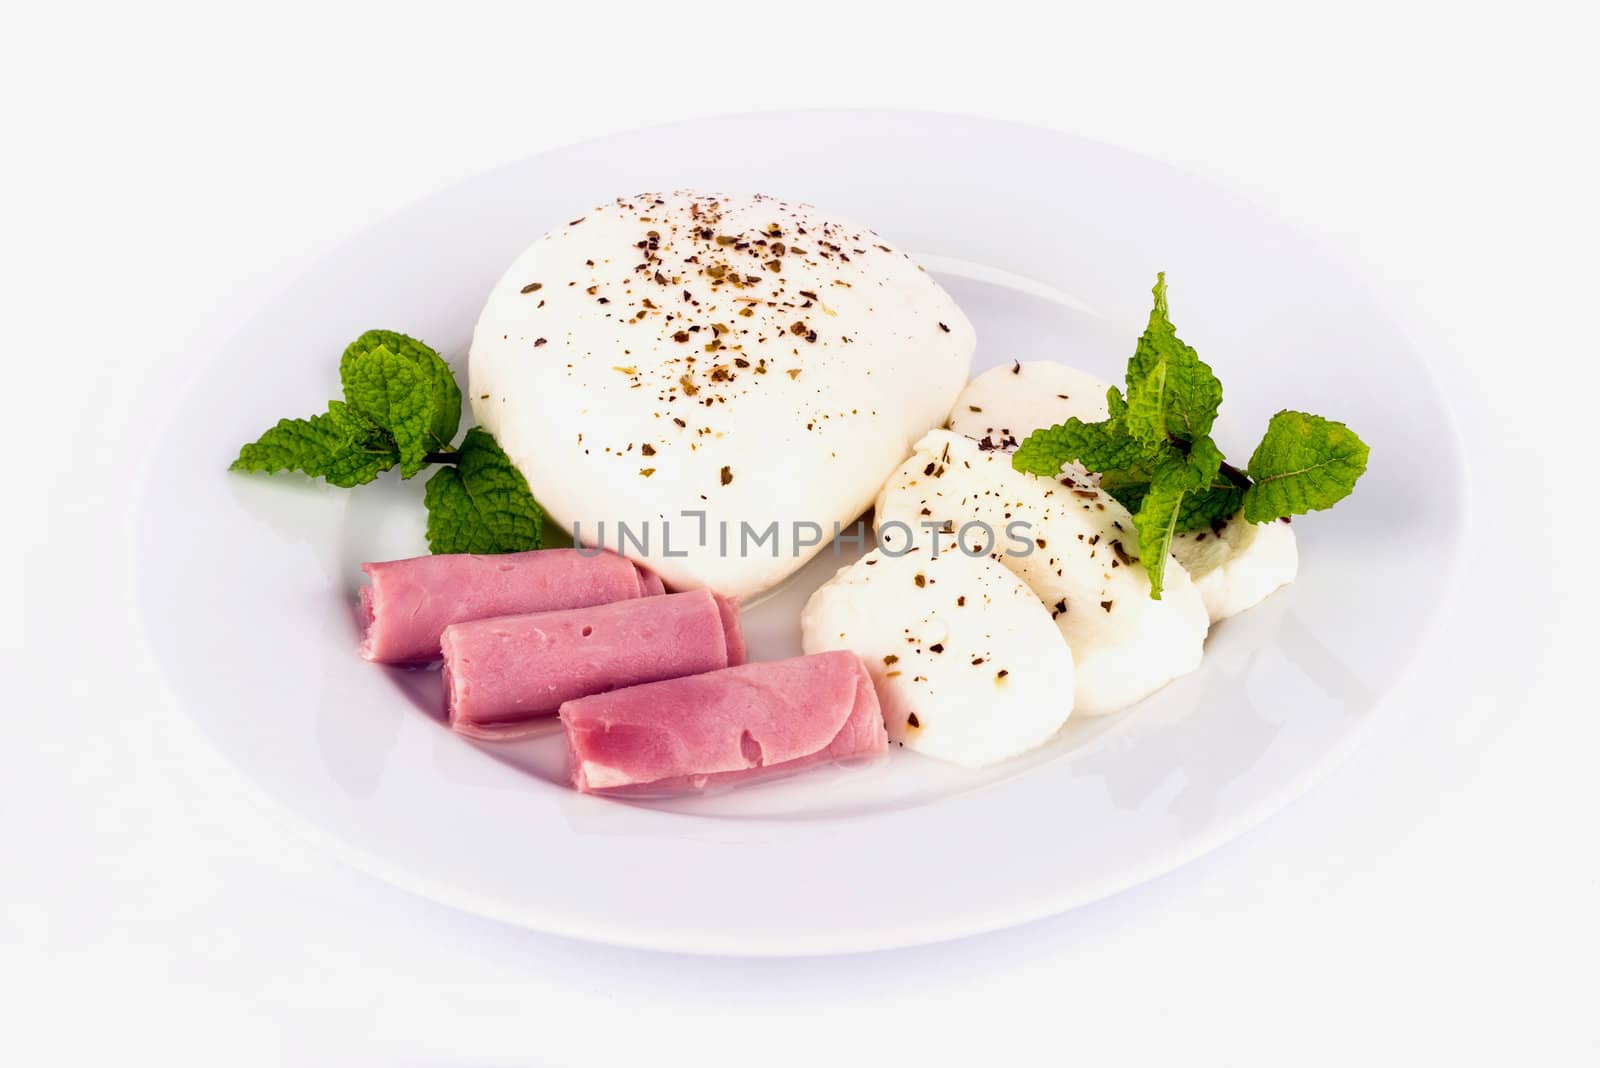 Mozzarella cheese and ham on the plate.